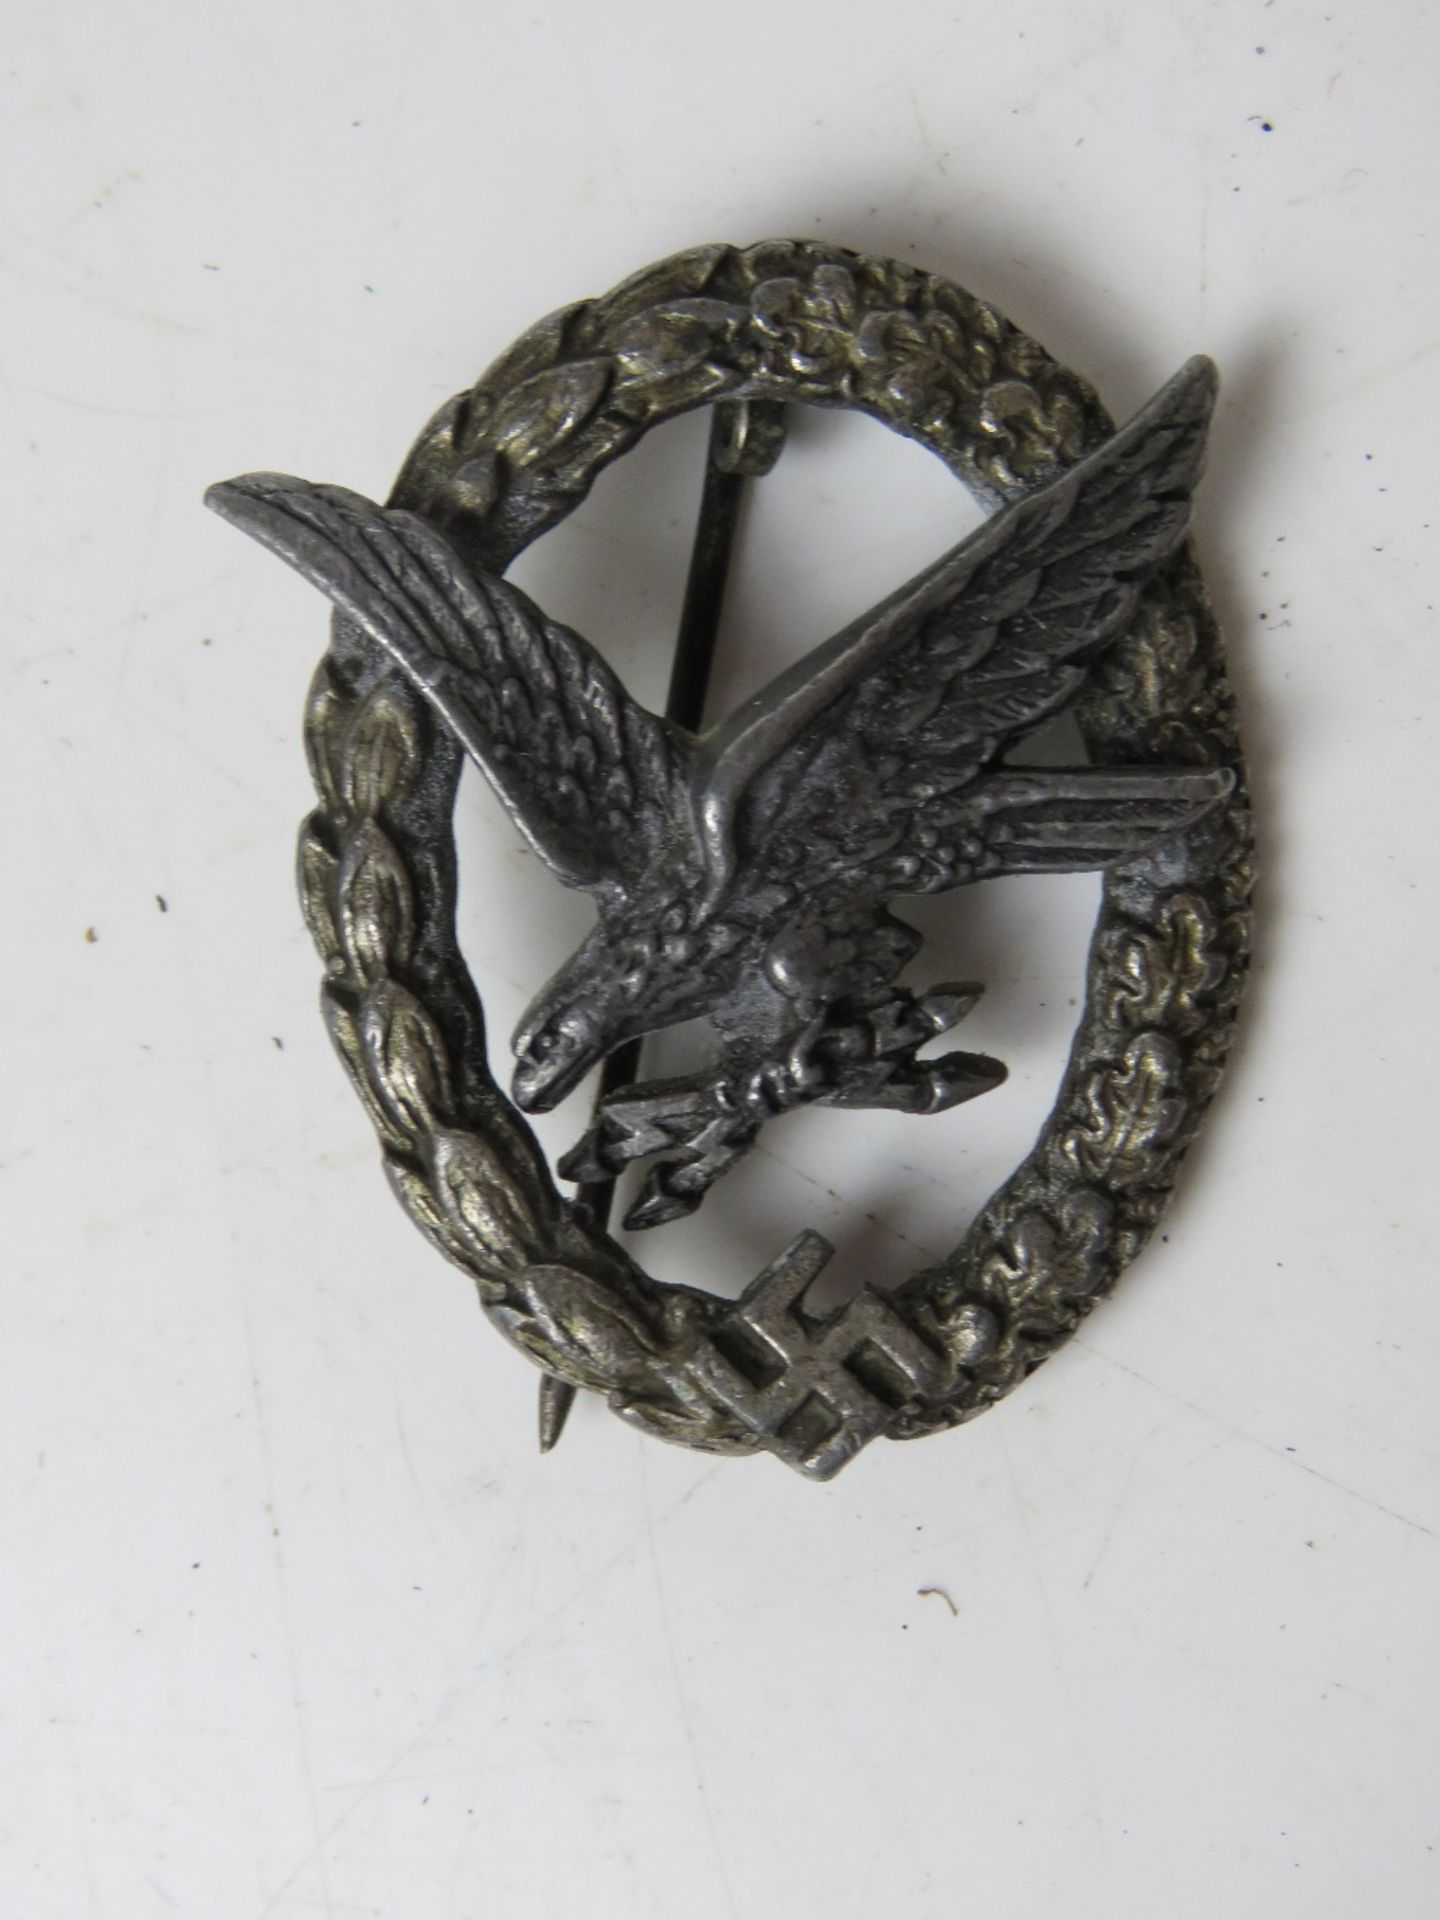 A Luftwaffe Radio Op/Air Gunners badge, makers J.M.M.E, with pin (a/f).